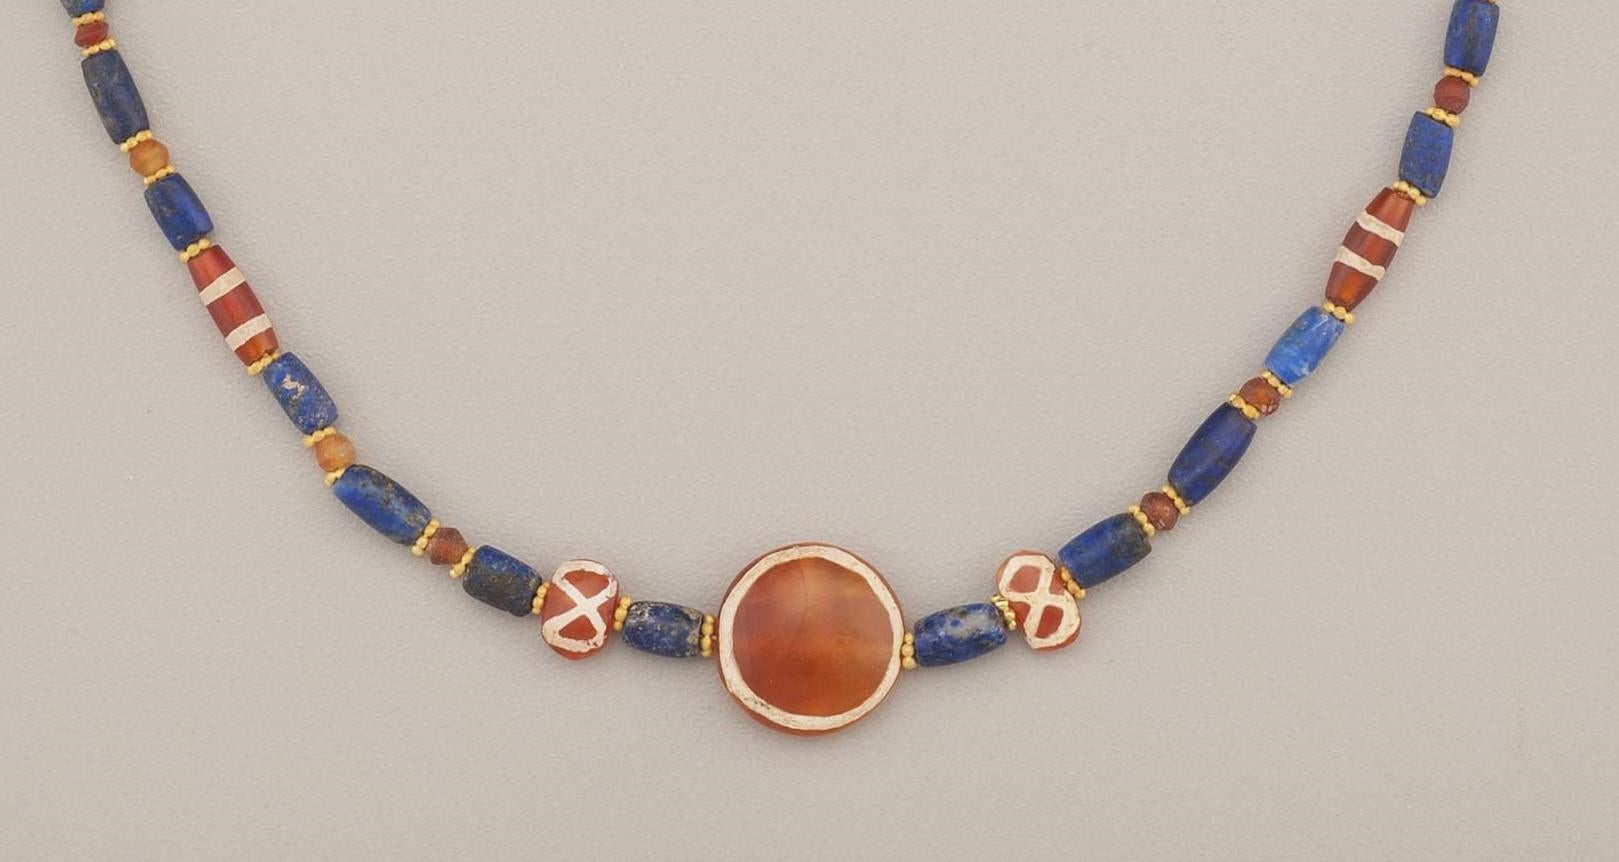 Twenty-seven carnelian beads, nine of which are patterned (commonly called “etched” carnelians), alternating with twenty-eight lapis lazuli beads. Each ancient stone bead is separated by a granulated 22k gold ring bead, fifty-four in all. The